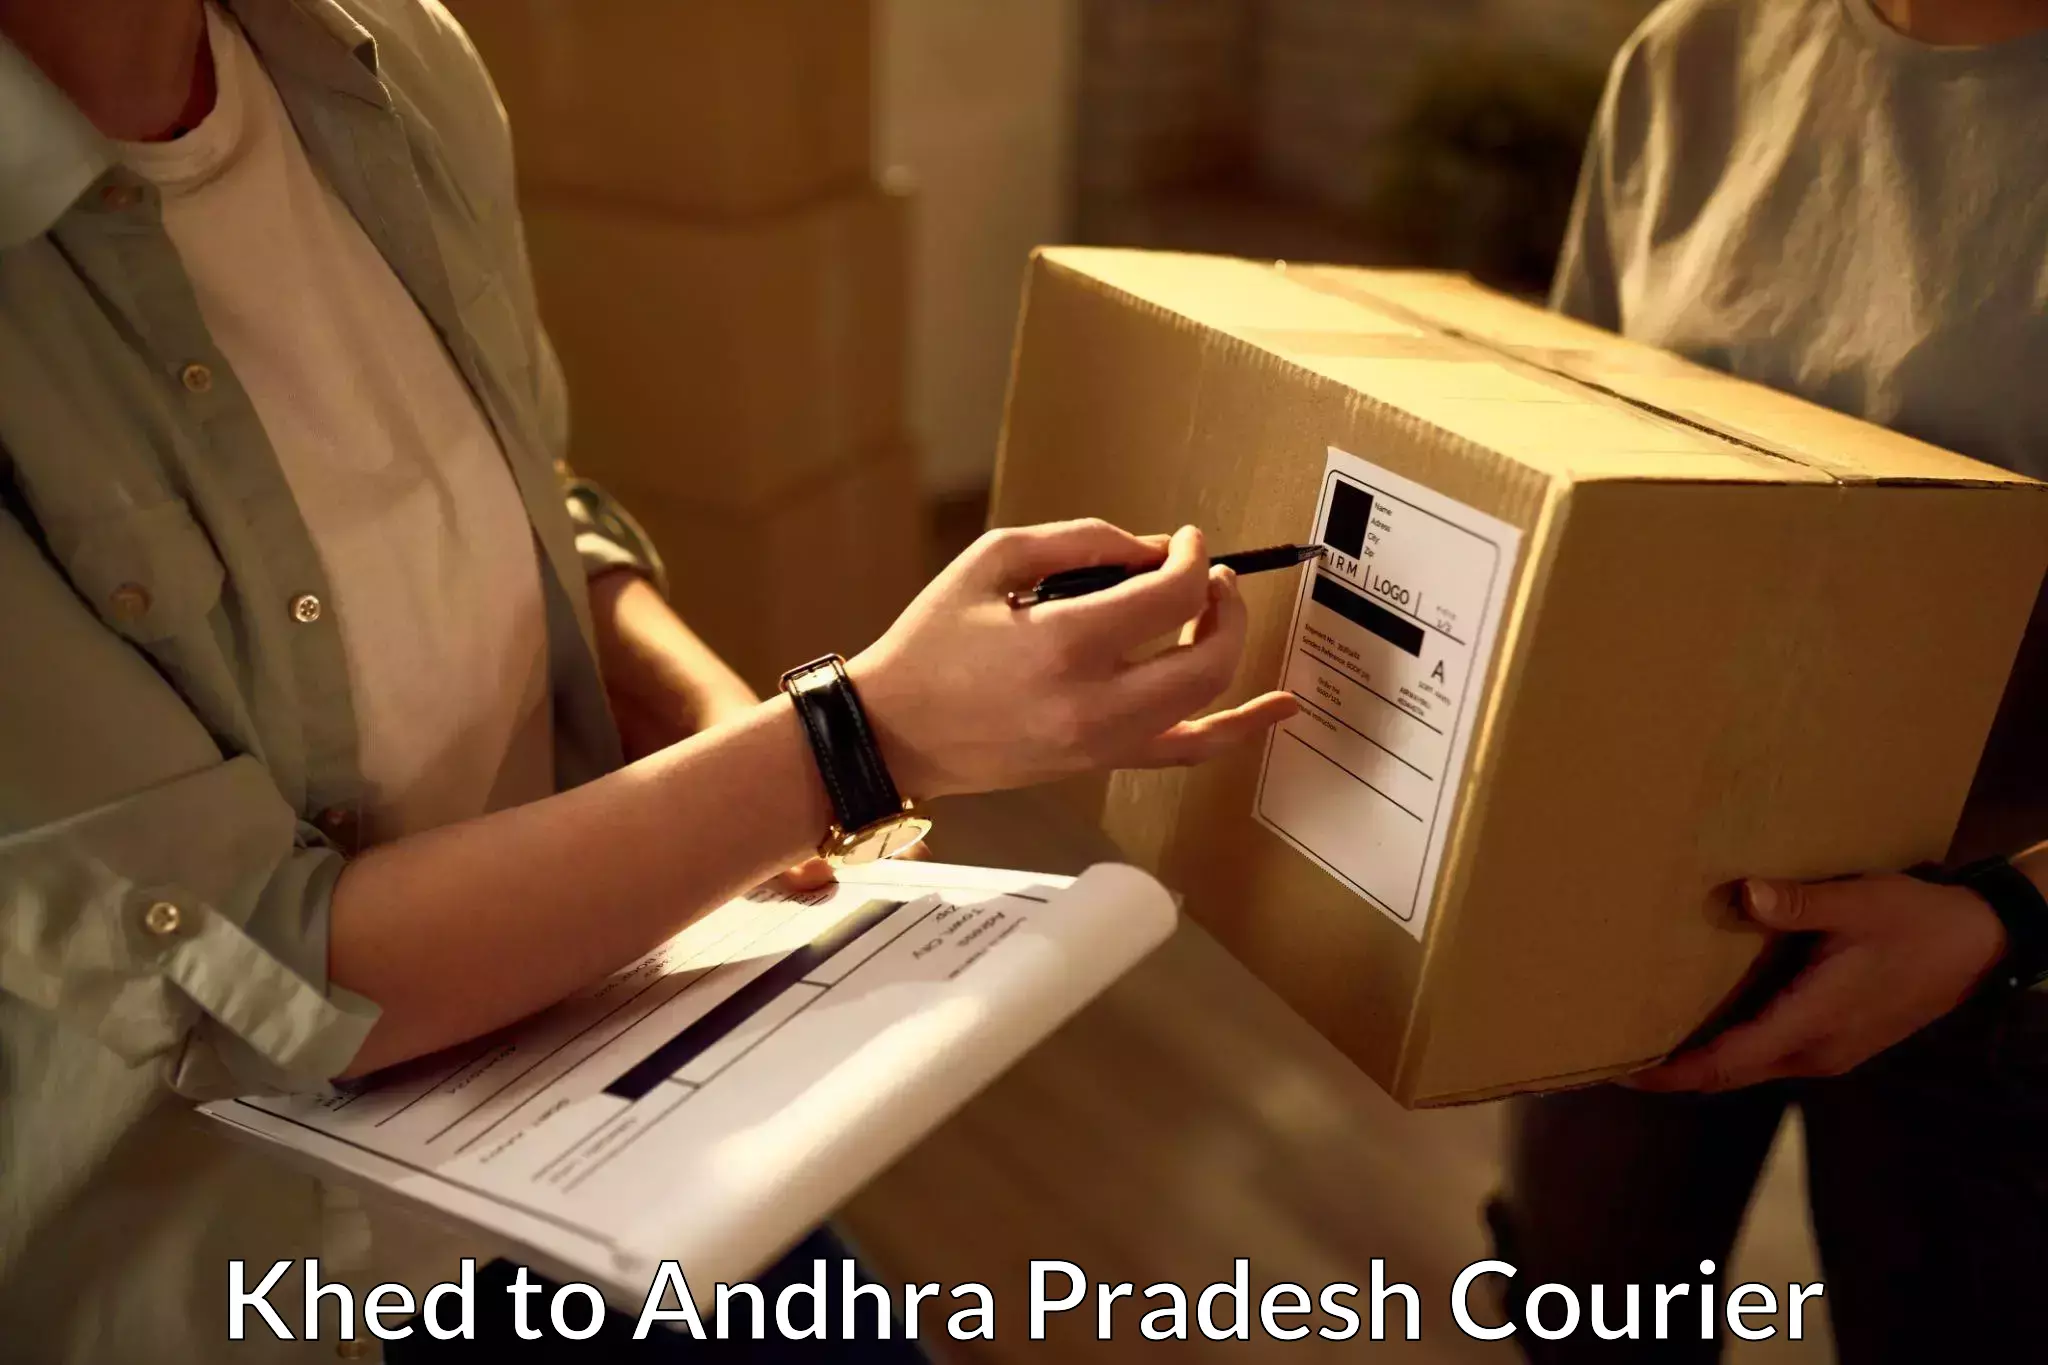 24-hour courier service Khed to Palakollu